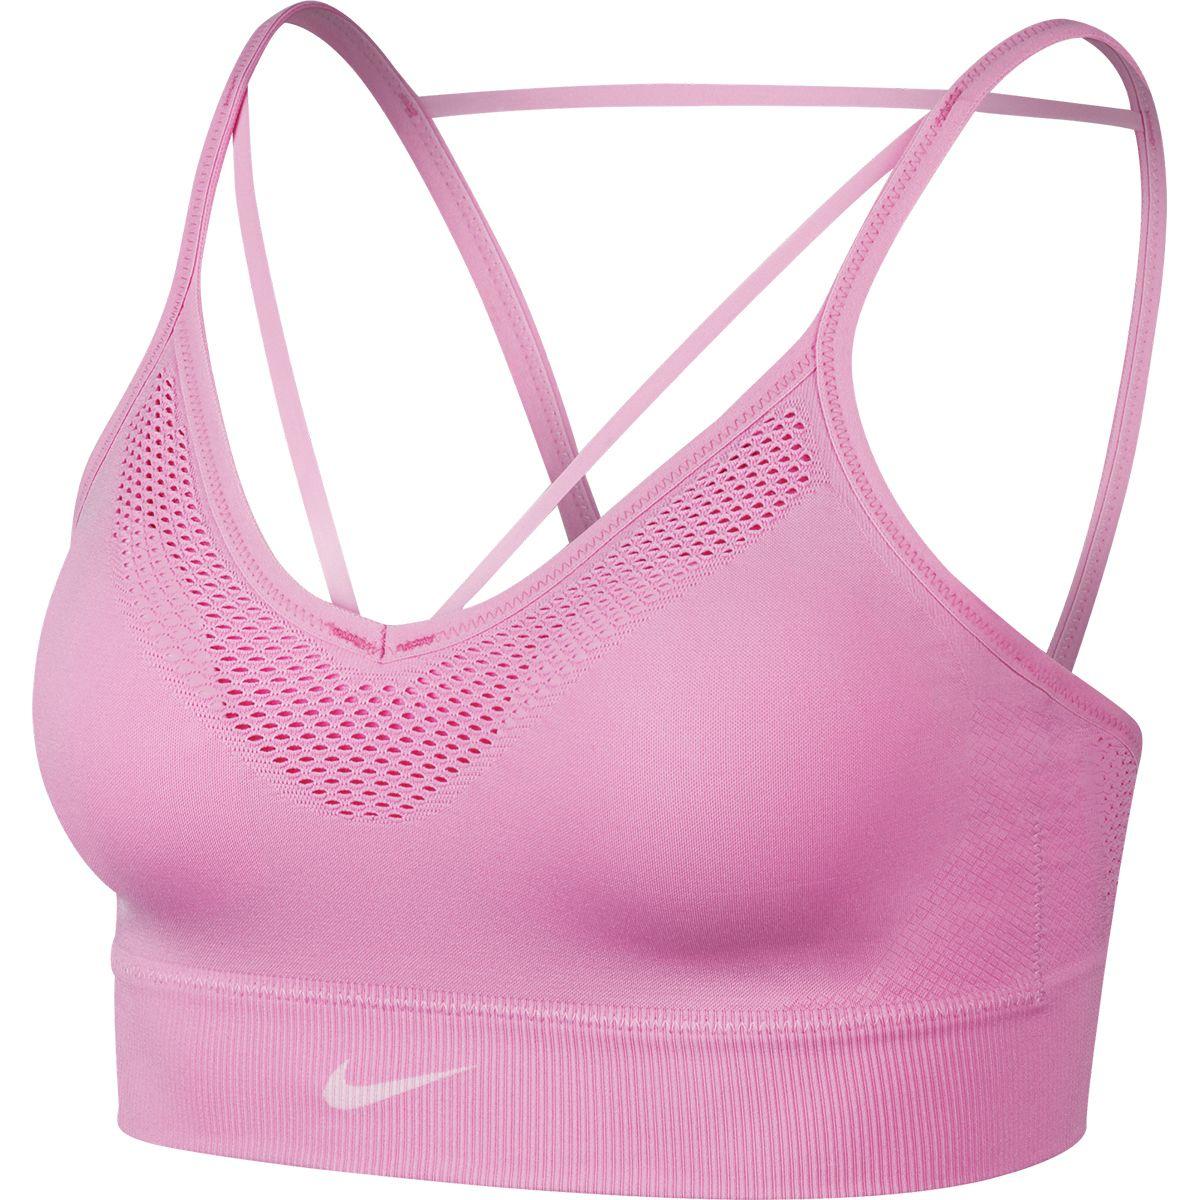 Nike Synthetic Seamless Dri-fit Sports Bra in Pink/White (Pink) - Save ...